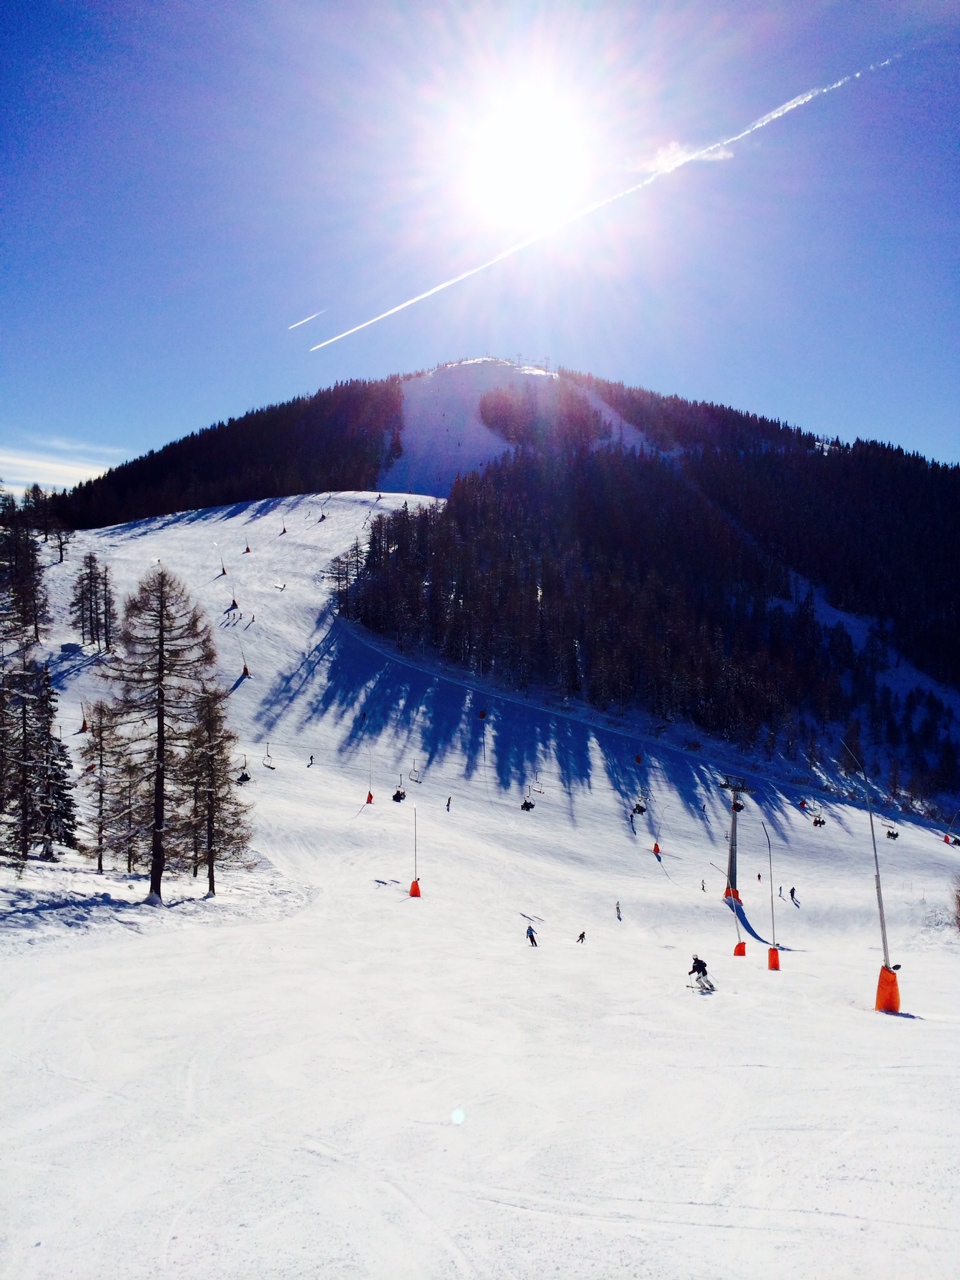 the sun is shining down on a small ski slope